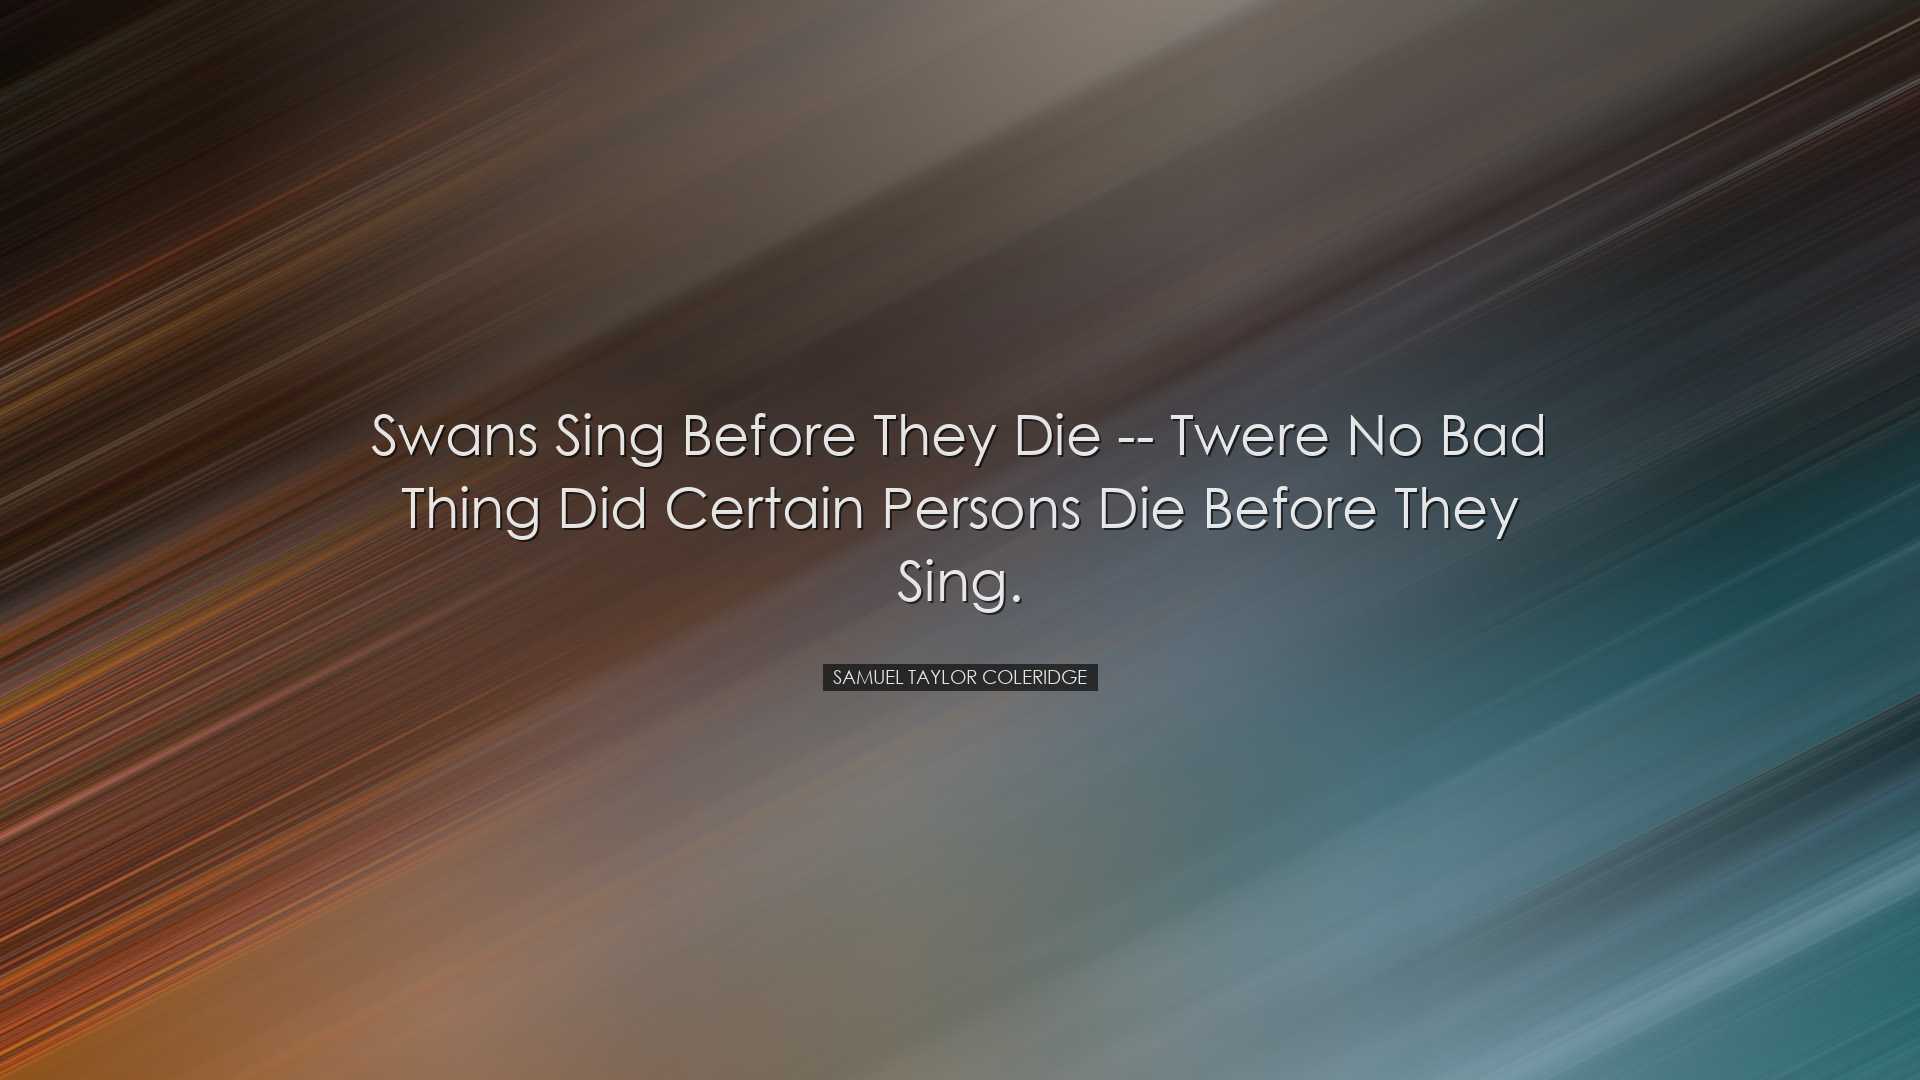 Swans sing before they die -- twere no bad thing did certain perso